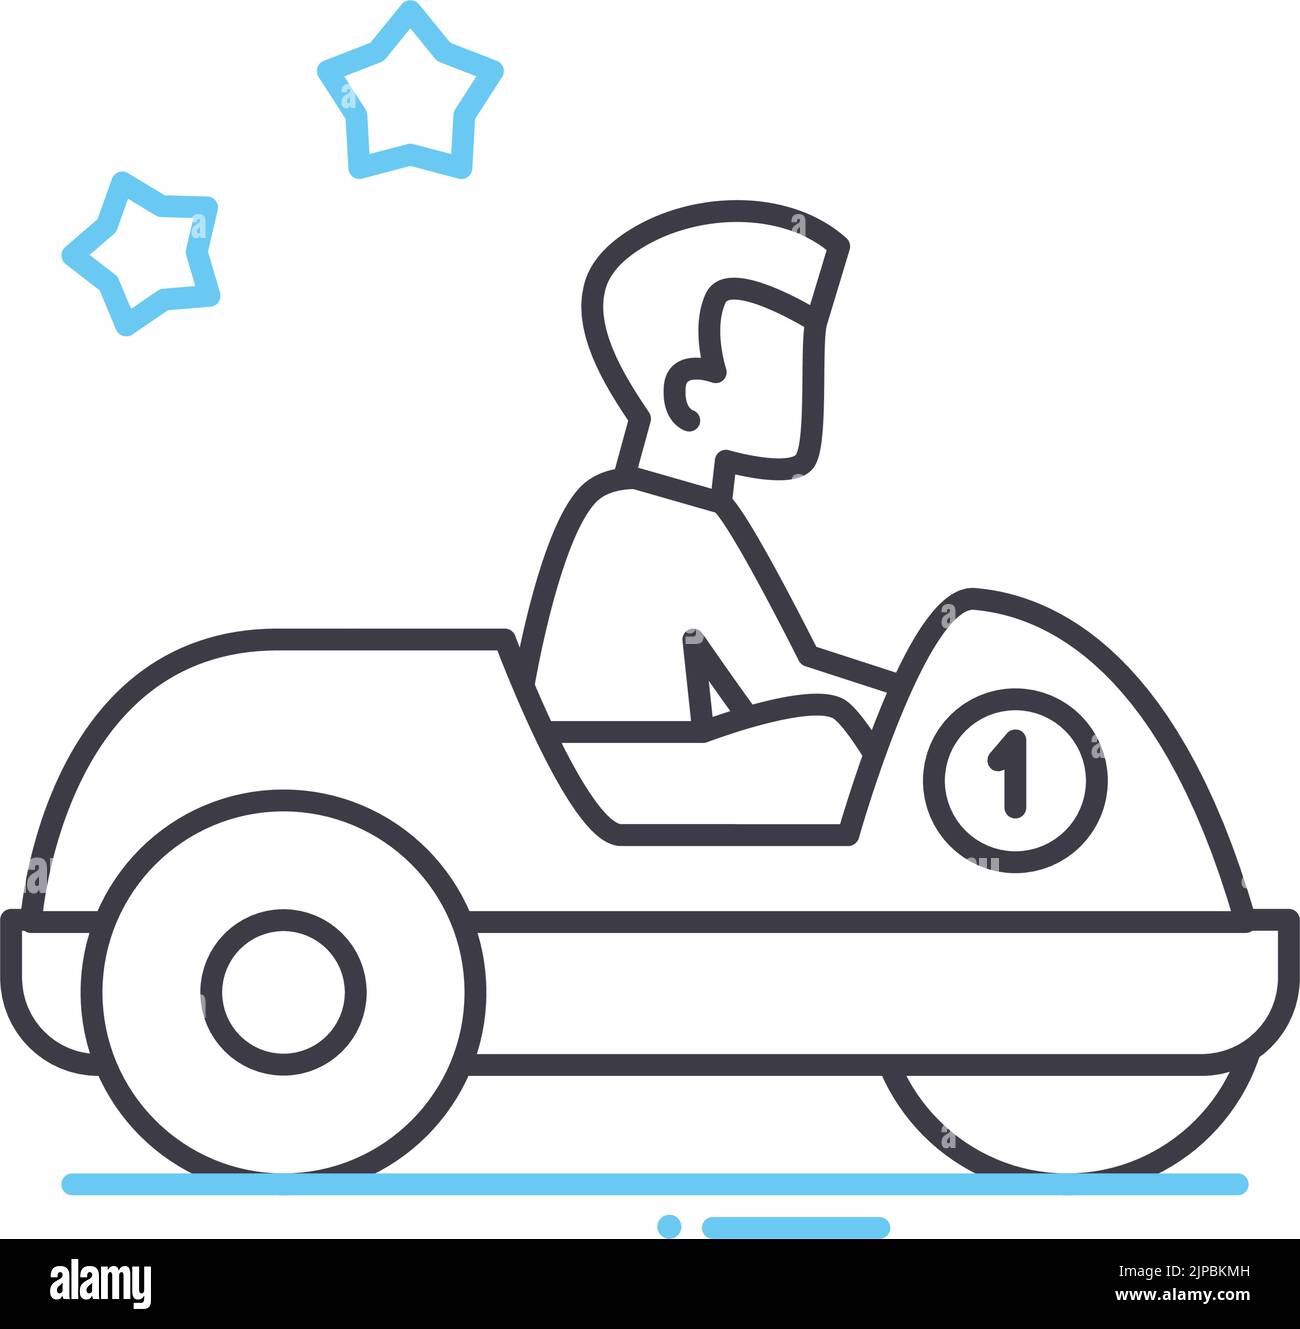 Kart race.ai Royalty Free Stock SVG Vector and Clip Art